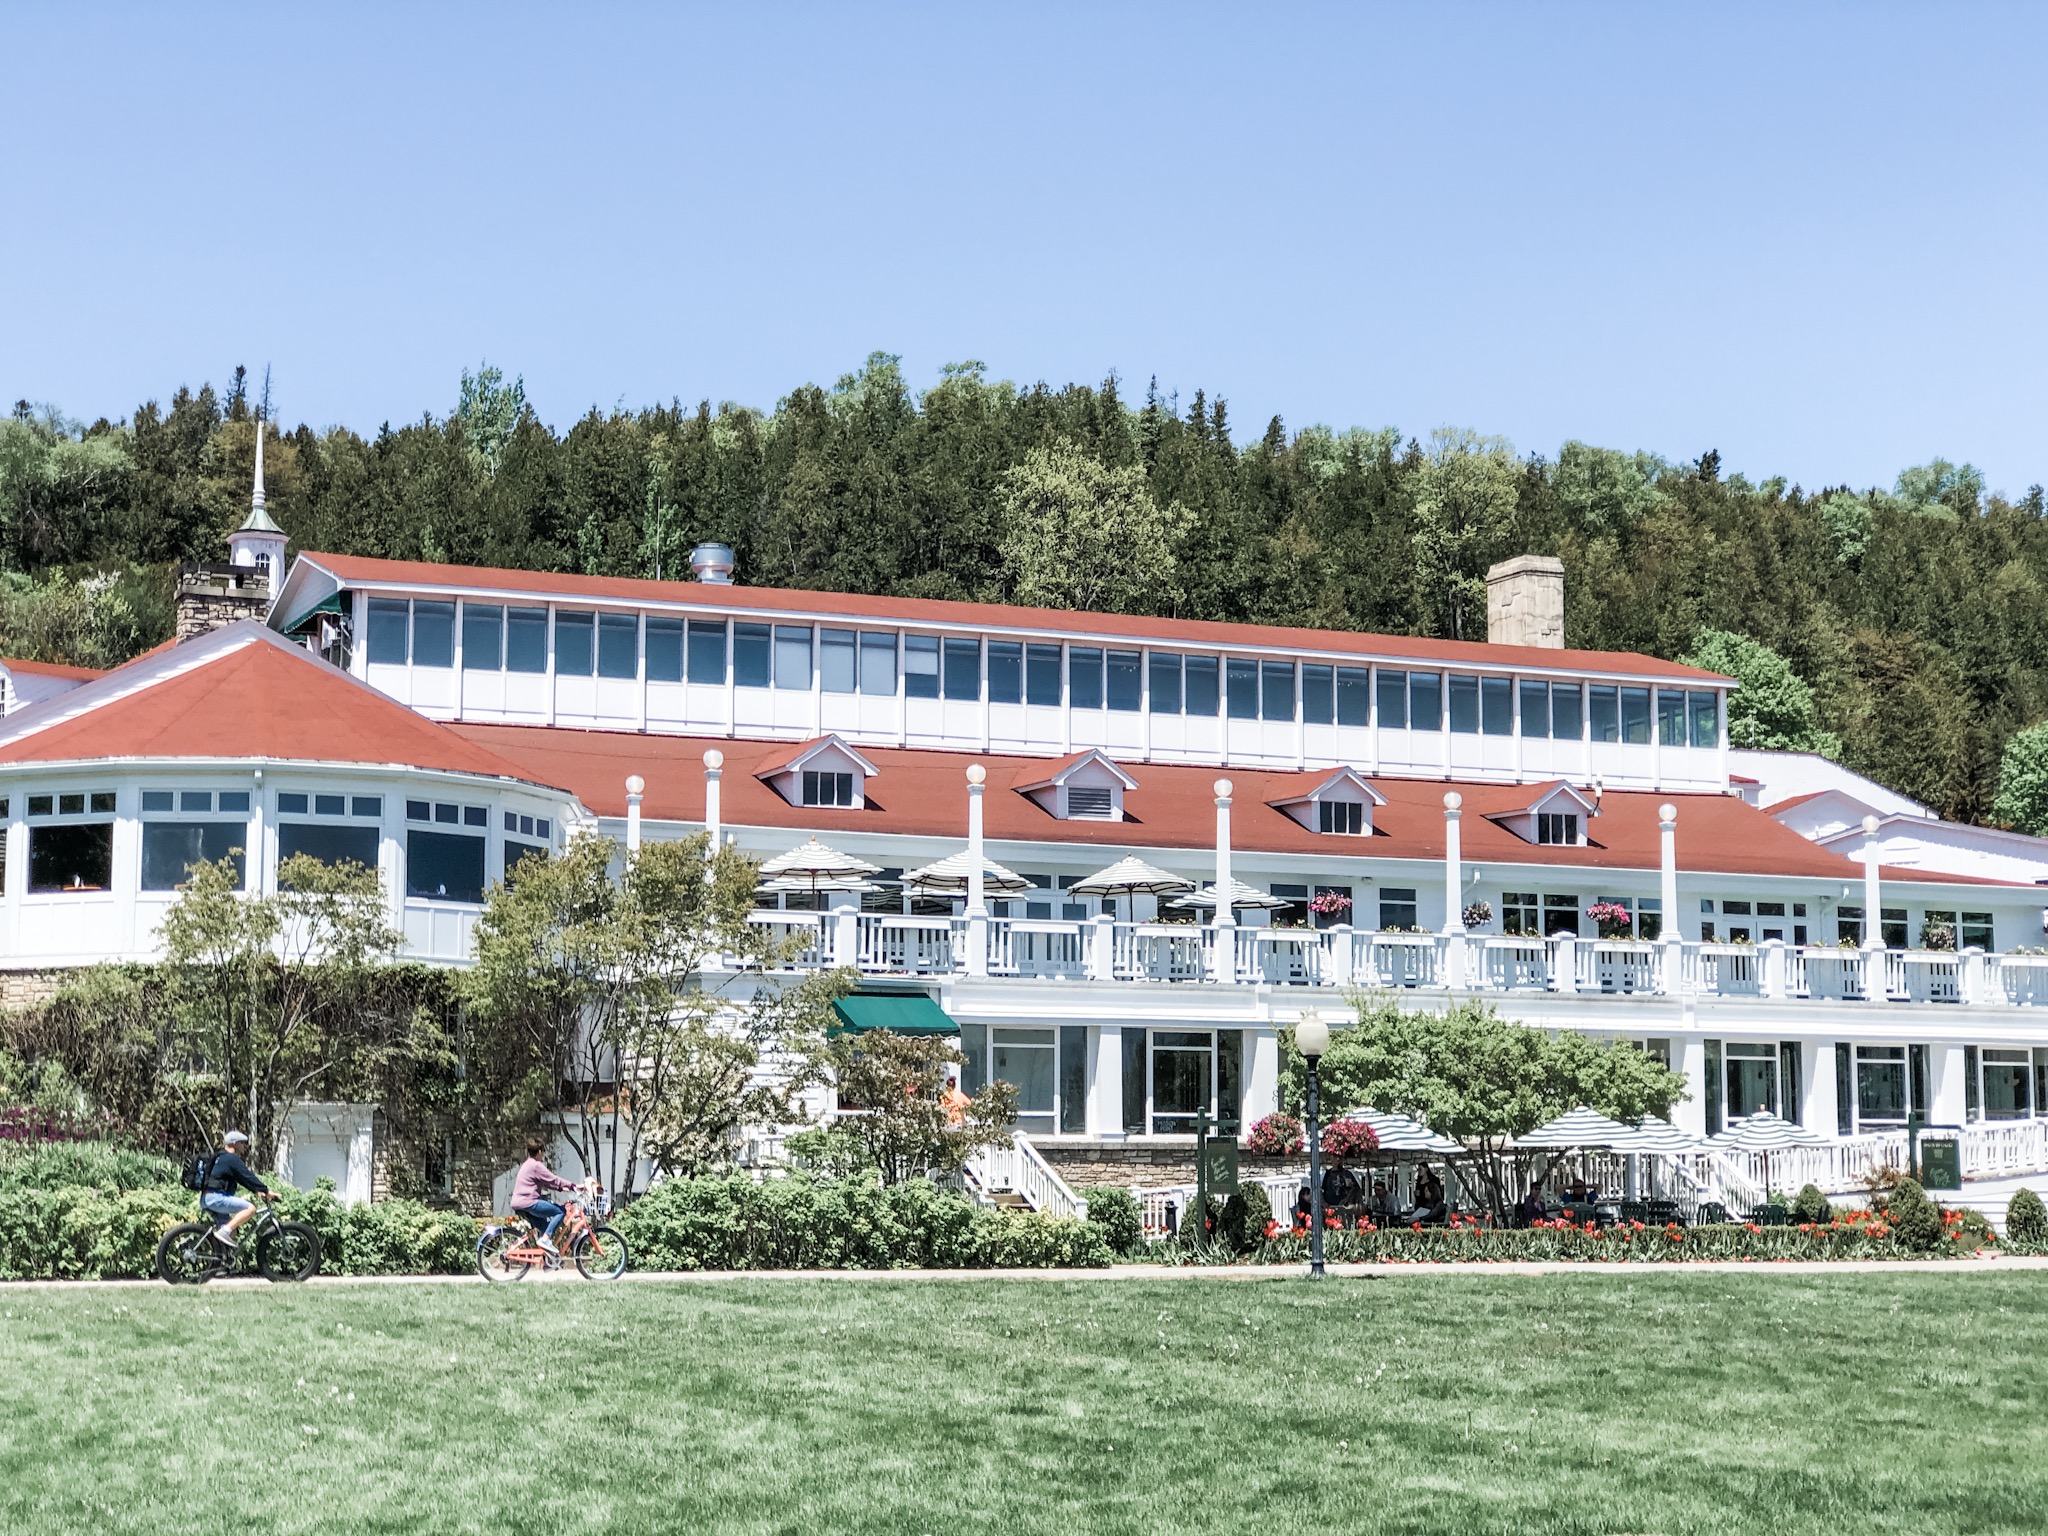 Where to stay and what to see on Mackinac Island. An honest review of Mission Point Resort on Mackinac Island, Michigan.